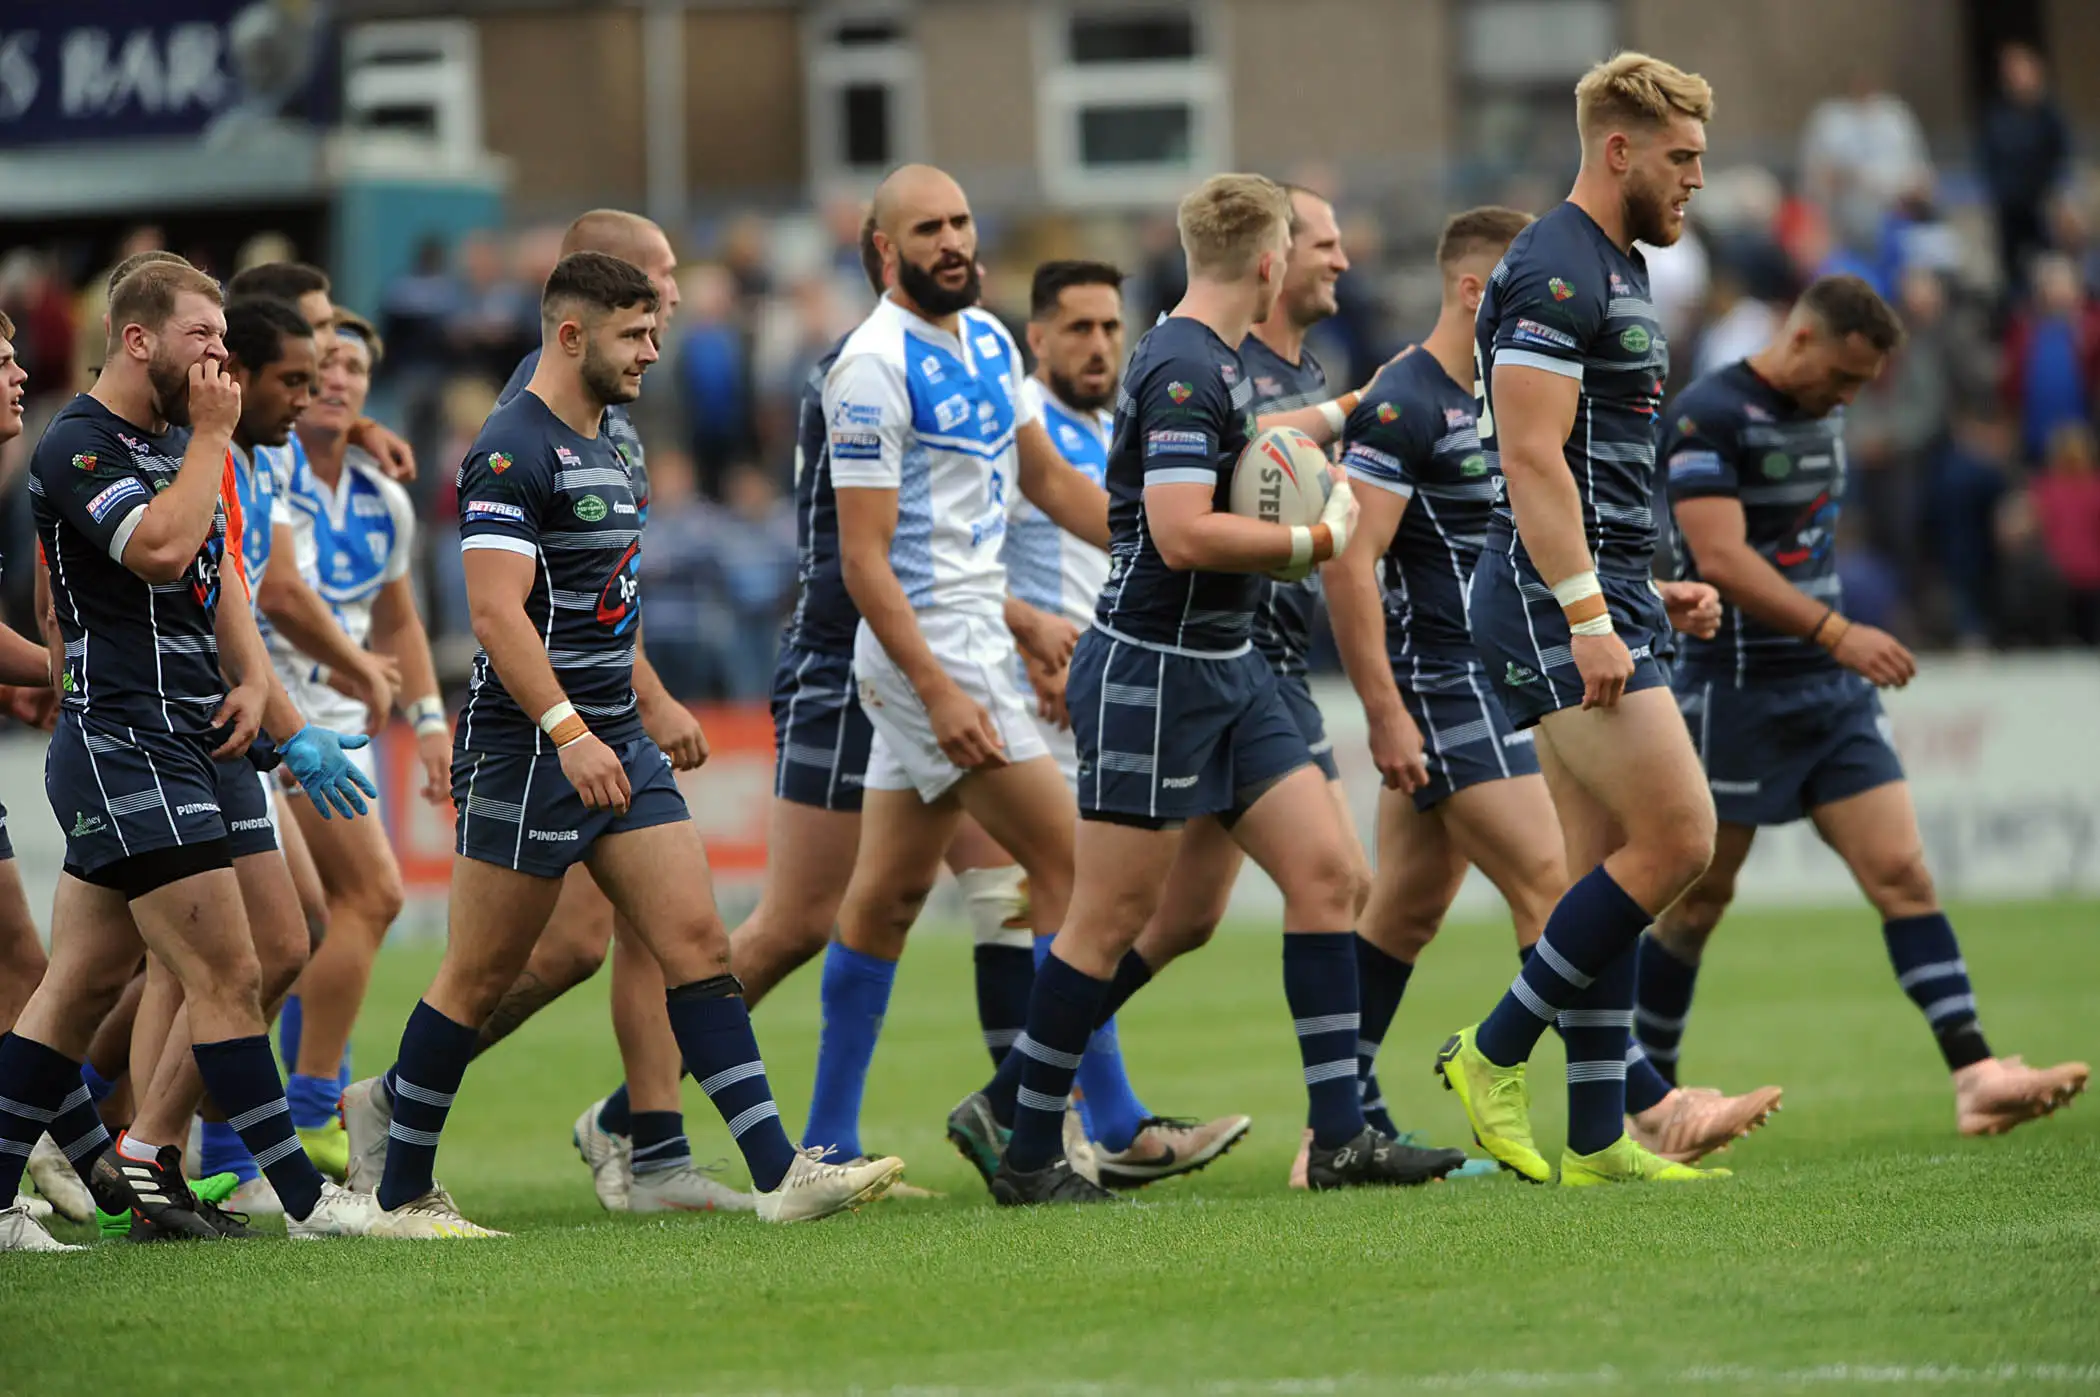 Featherstone to play against Valencia in Spain in 2020